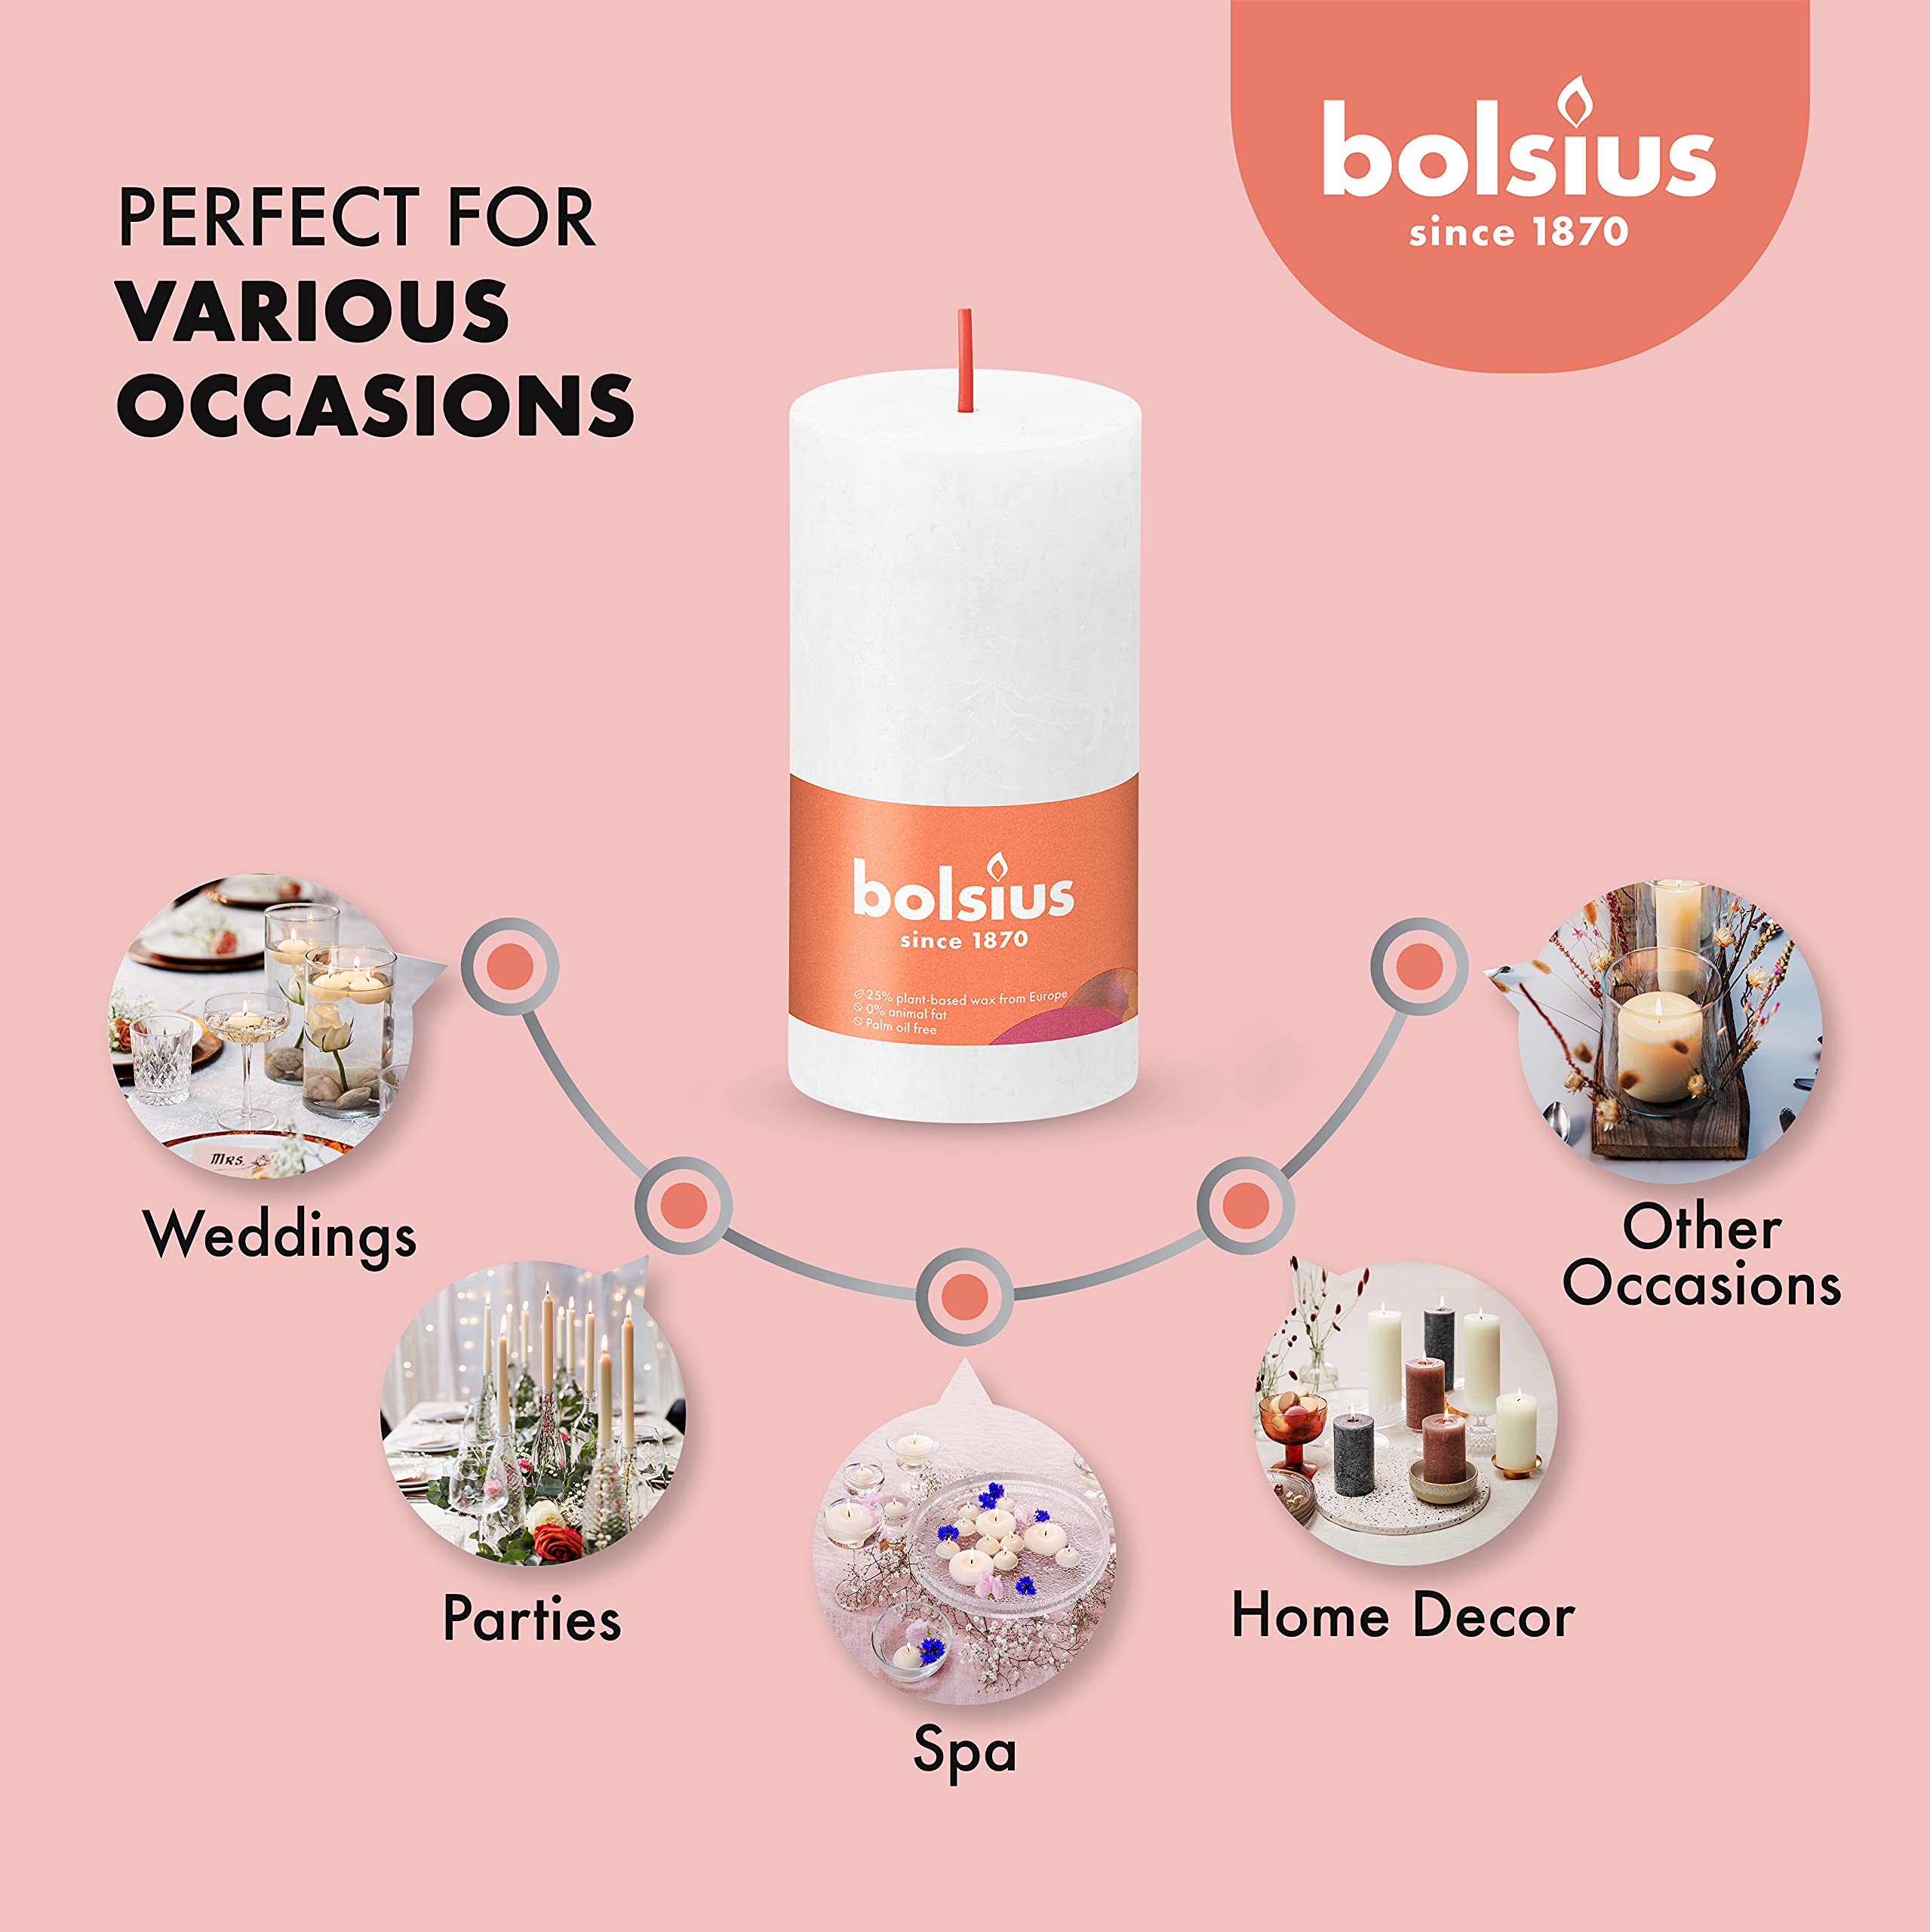 BOLSIUS 4 Pack White Rustic Pillar Candles - 2 X 4 Inches - Premium European Quality - Includes Natural Plant-Based Wax - Unscented Dripless Smokeless 30 Hour Party D�cor and Wedding Candles  - Very Good